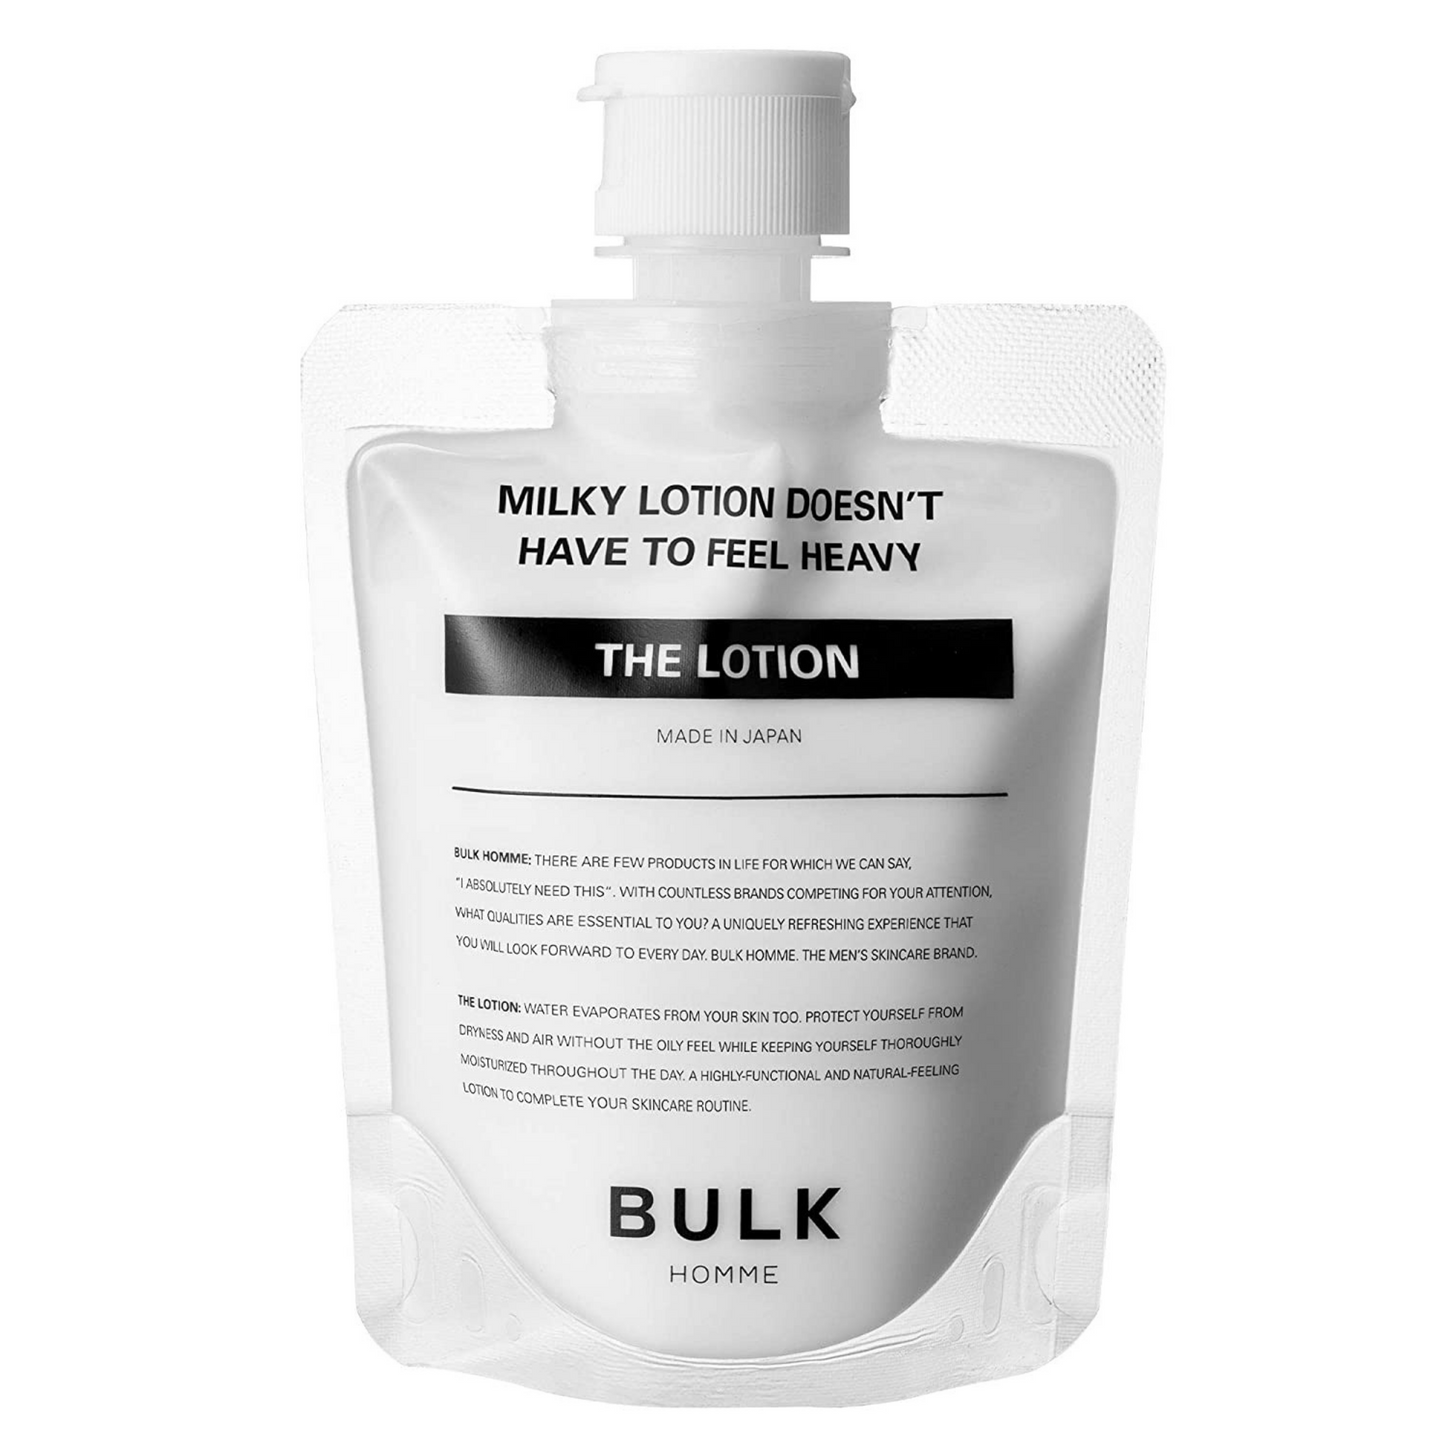 Primary image of The Lotion